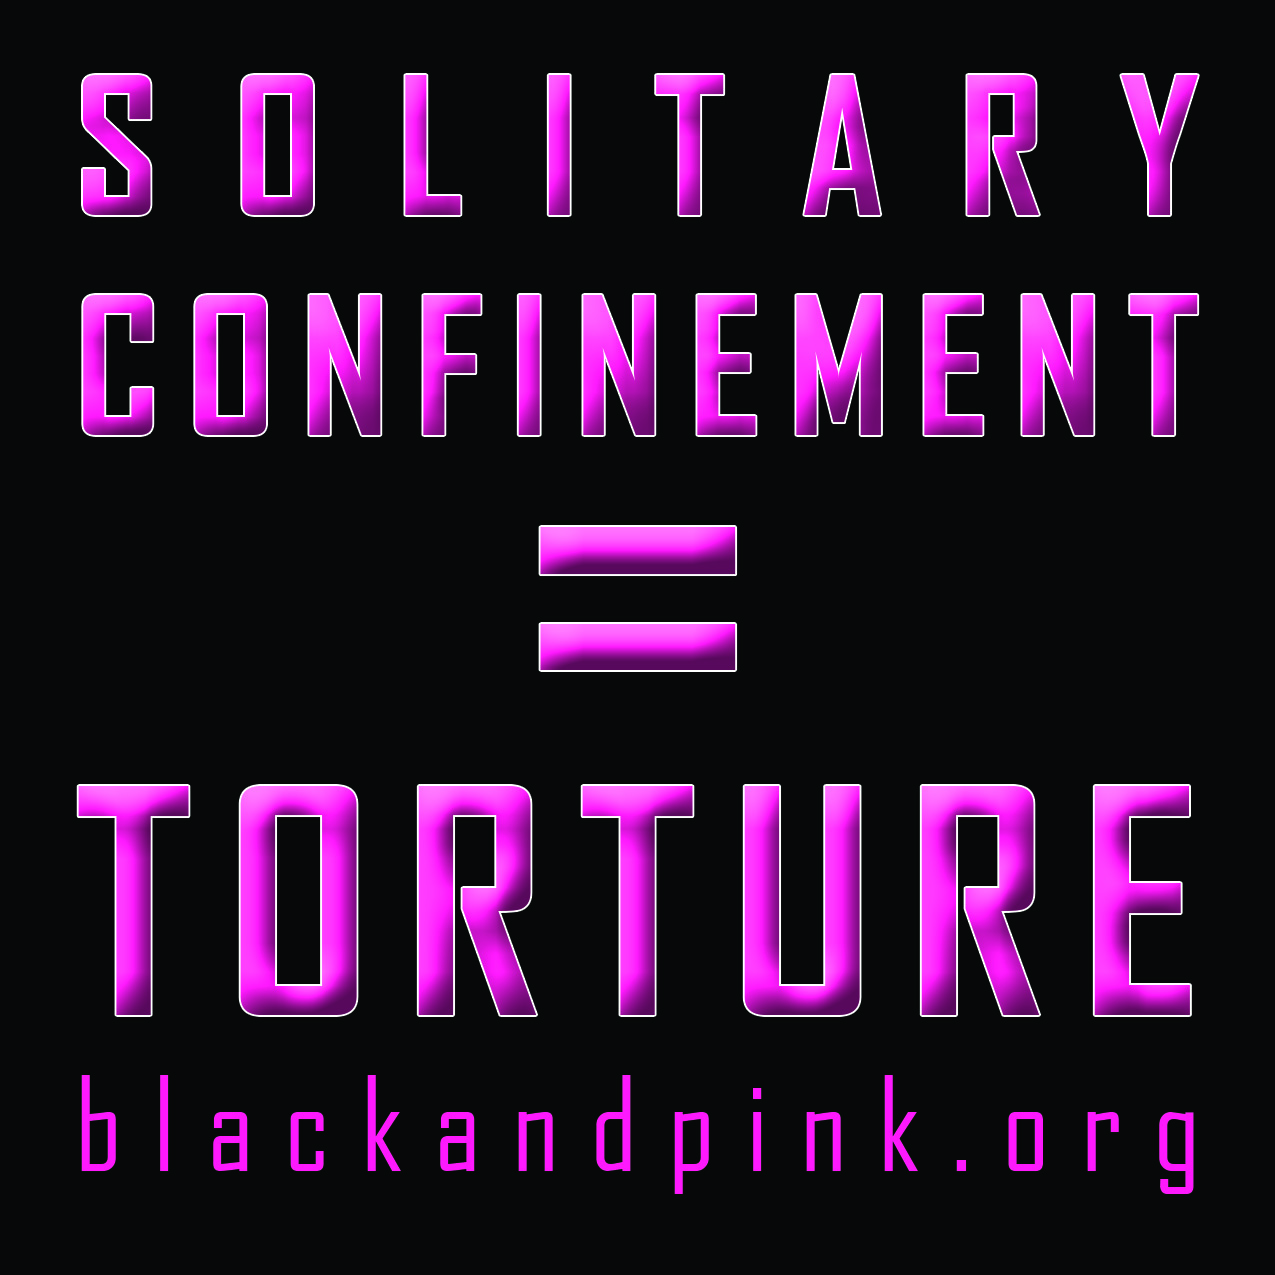 Join Our Campaigns to Abolish Solitary Confinement!